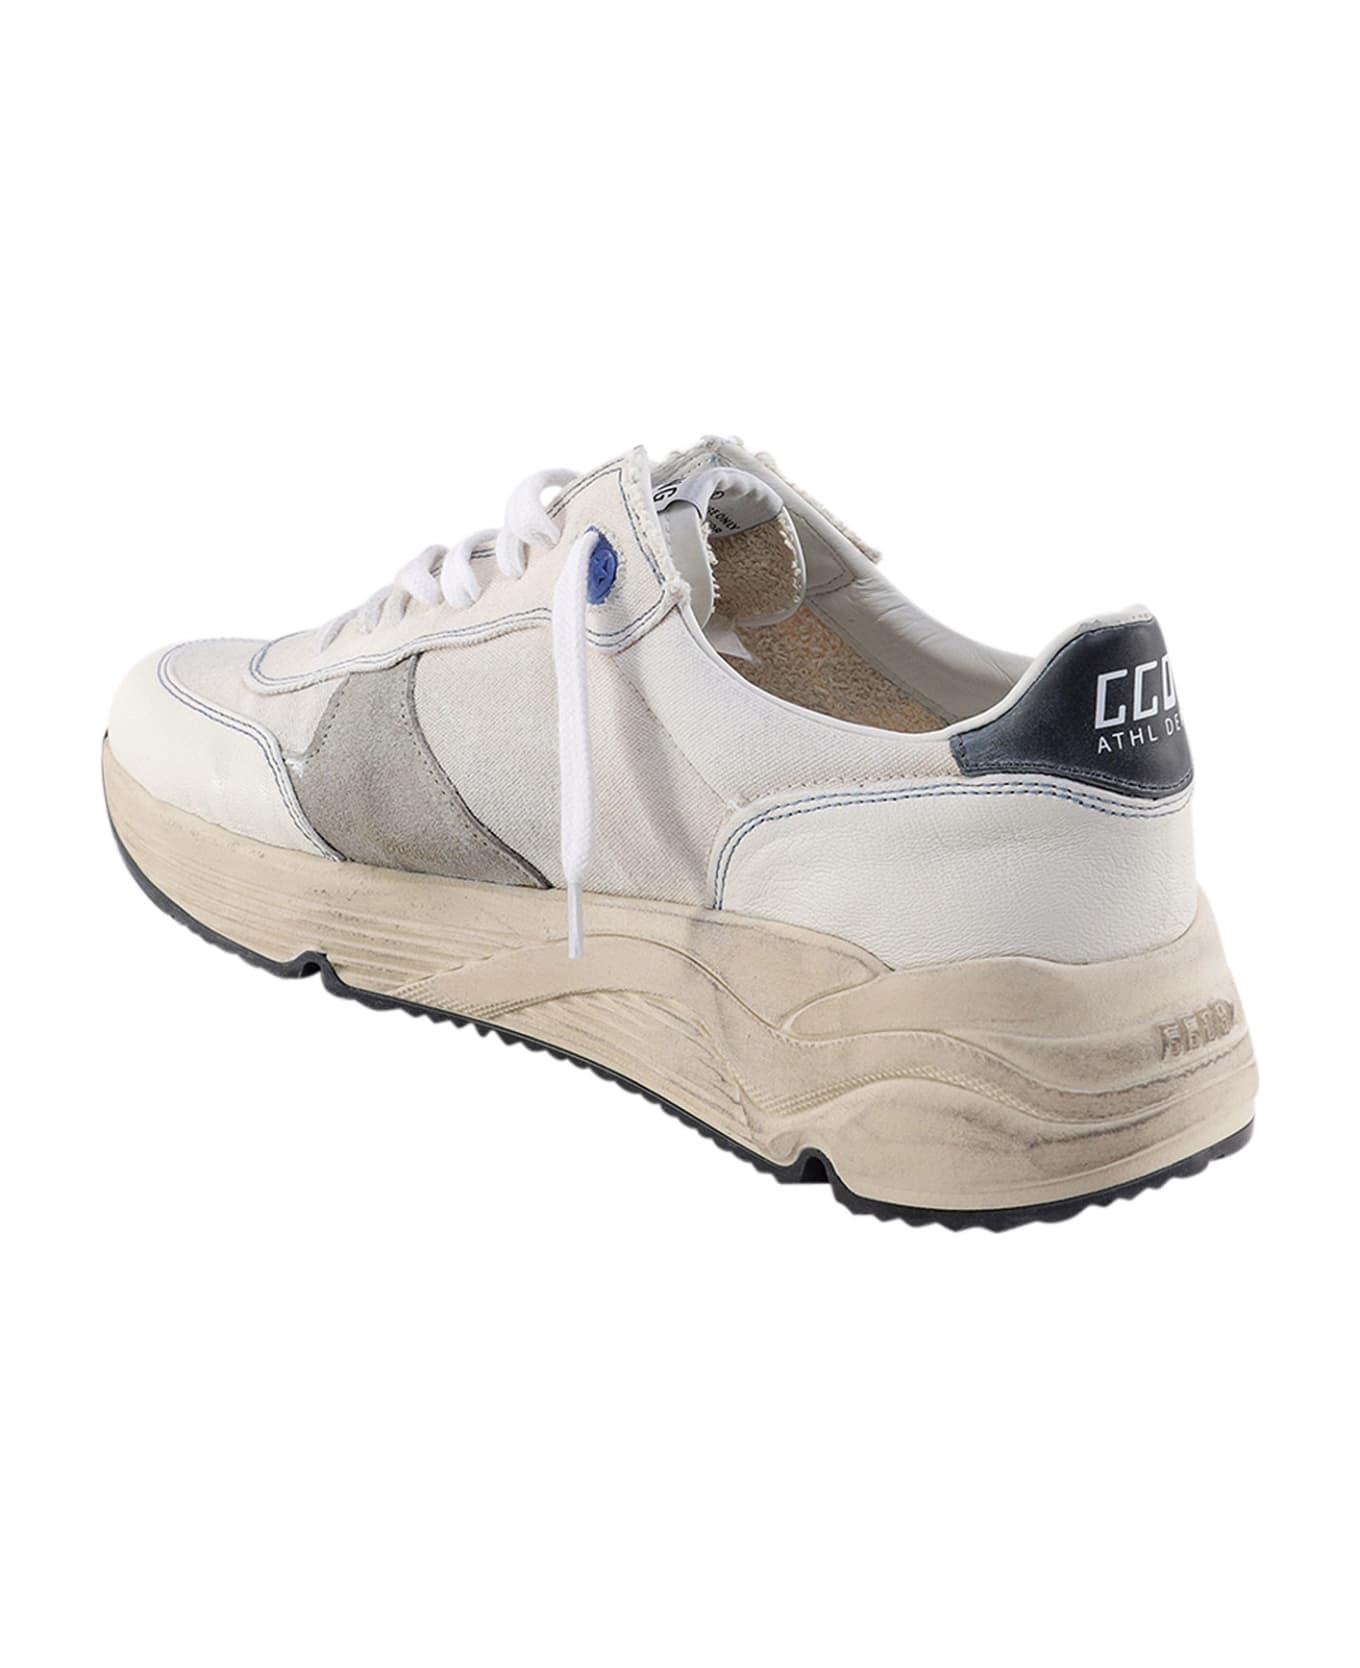 Golden Goose Running Sole Sneakers - Creamy White Ice/White/Blue